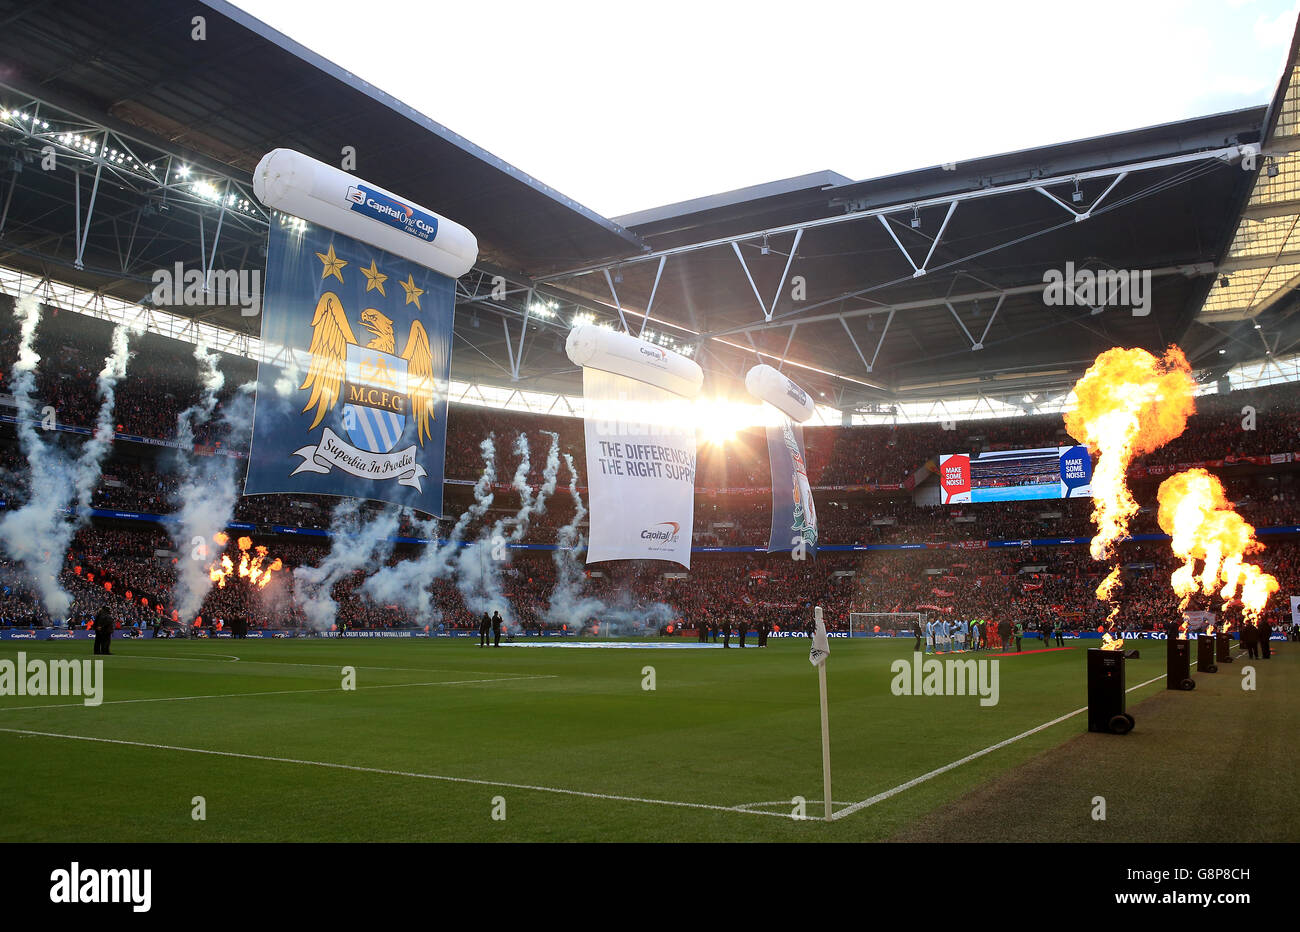 Liverpool v Manchester City - Capital One Cup - Final - Wembley Stadium. Pyrotechnics go off before kick off in the Capital One Cup final at Wembley Stadium, London. Stock Photo